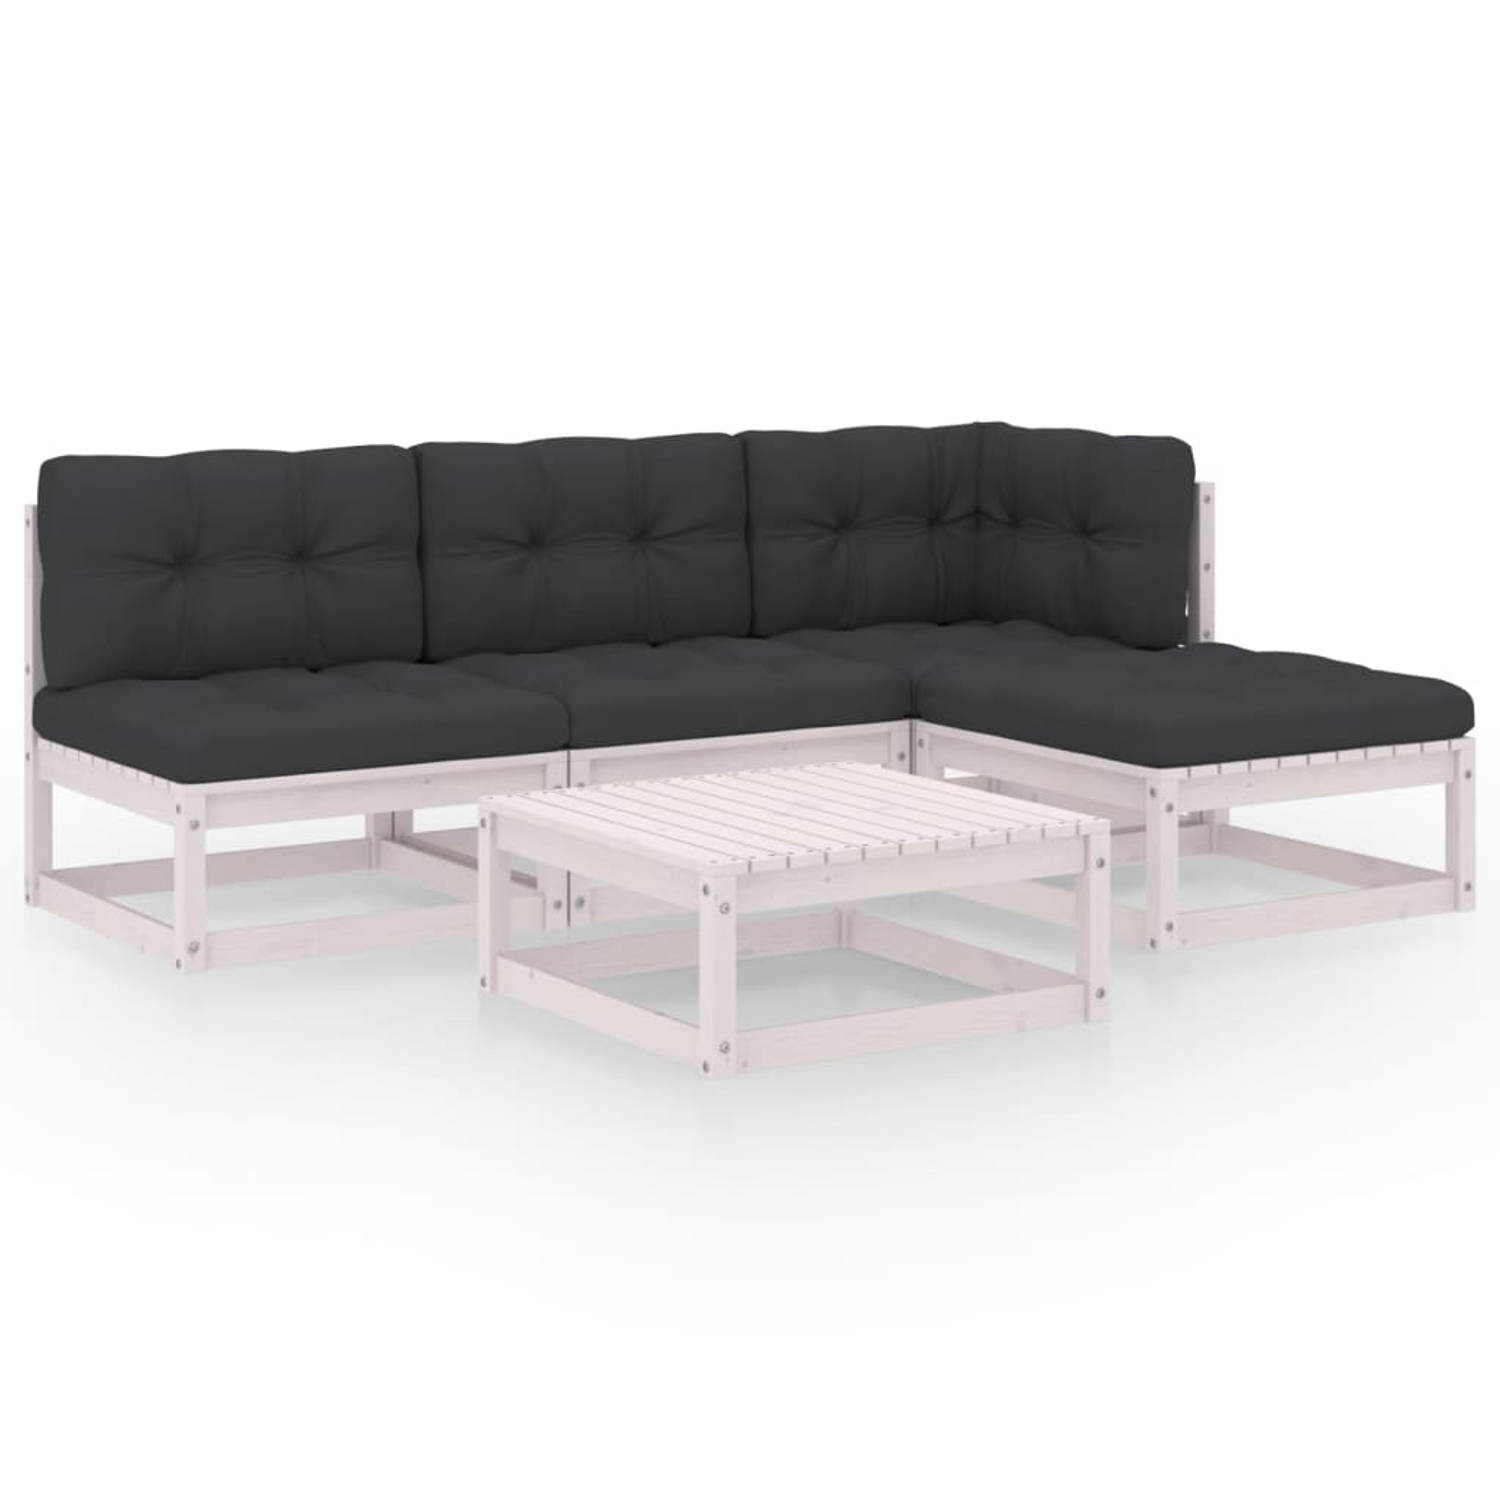 The Living Store Tuinset Grenenhout Lounge - 70x70x67 cm - Wit Antraciet